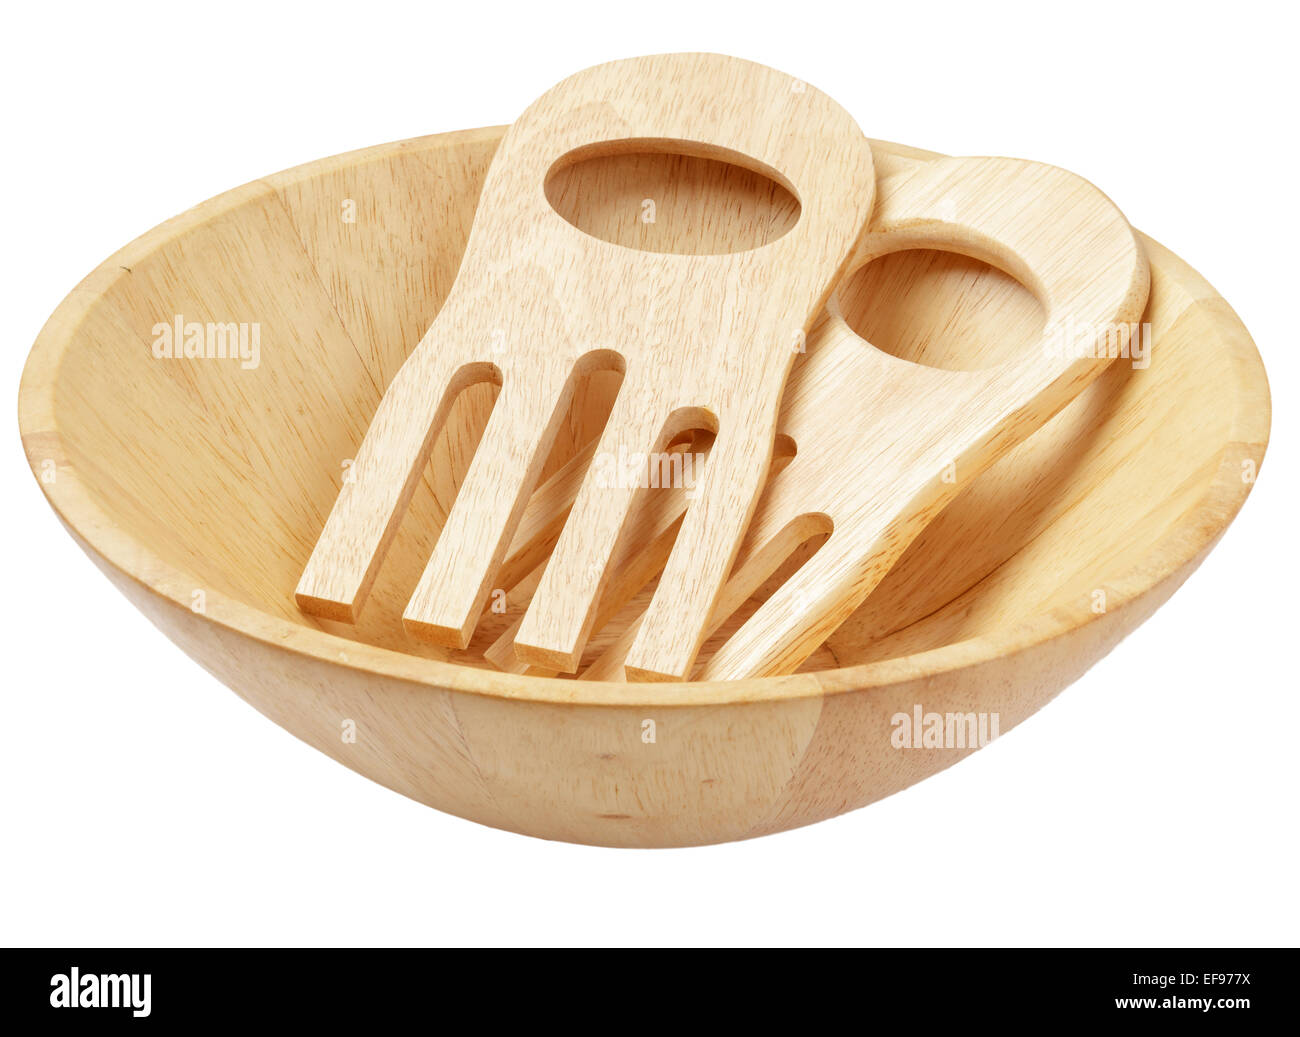 wooden serving bowl and salad servers Stock Photo